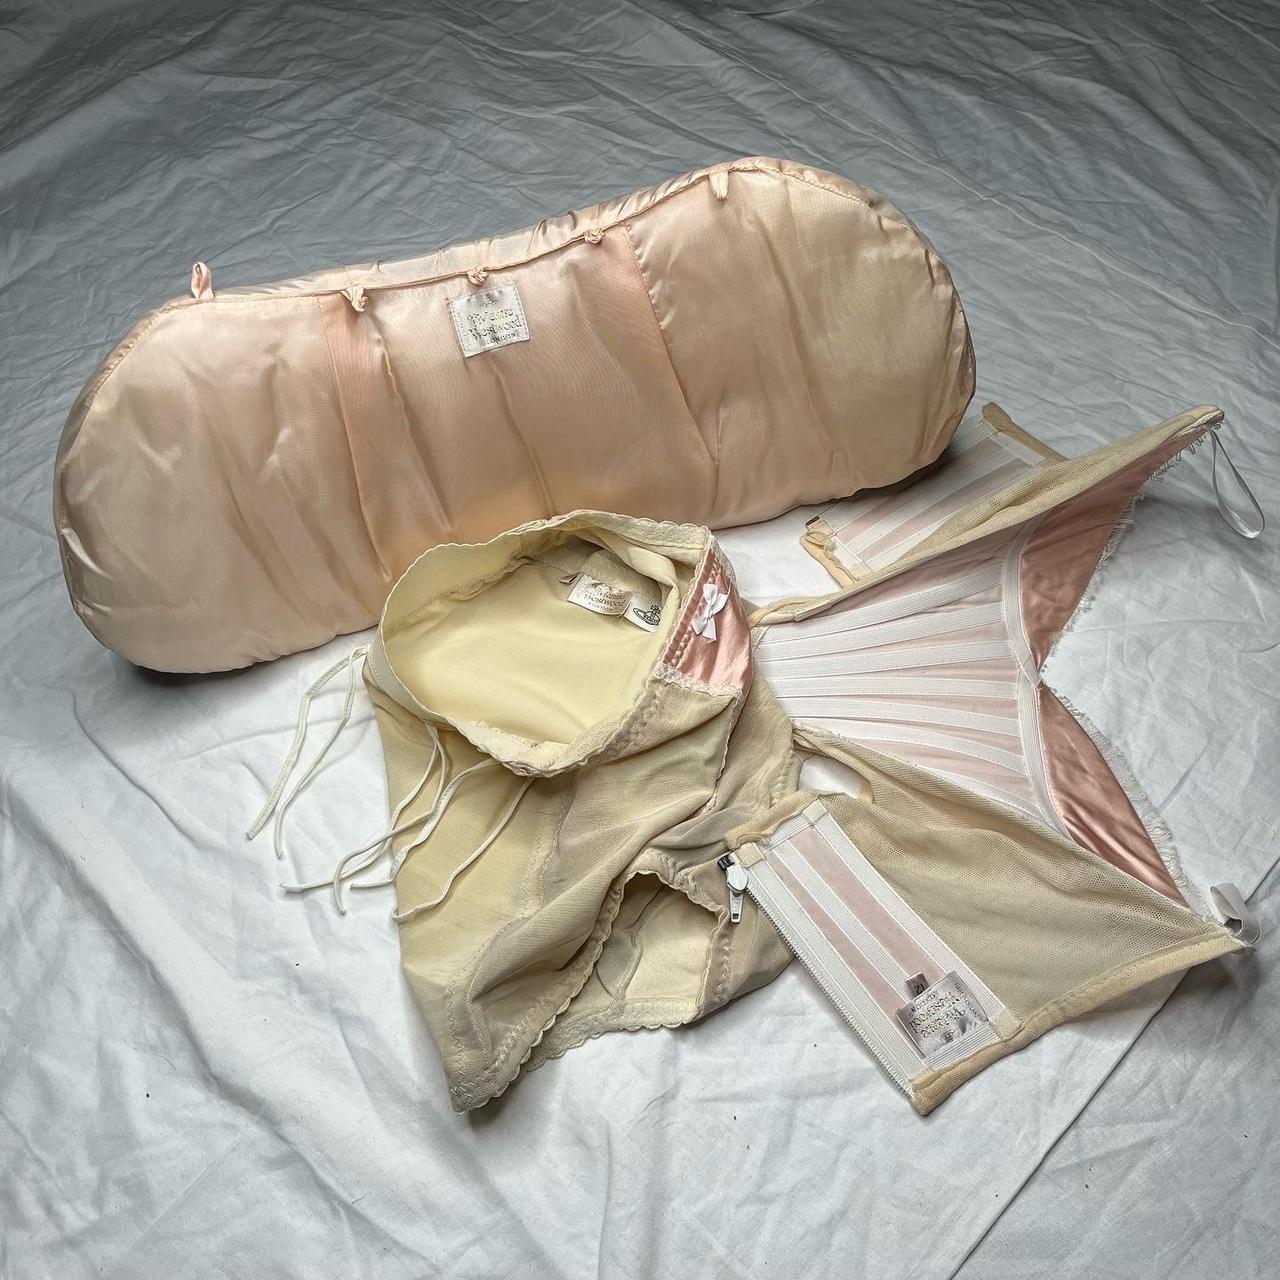 This Vivienne Westwood undergarment set is a breathtakingly beautiful piece of history. In a peach pink hue, it is inspired by Victorian fashion and is truly museum worthy. Its archival design and quality fabric make it a timeless piece that will